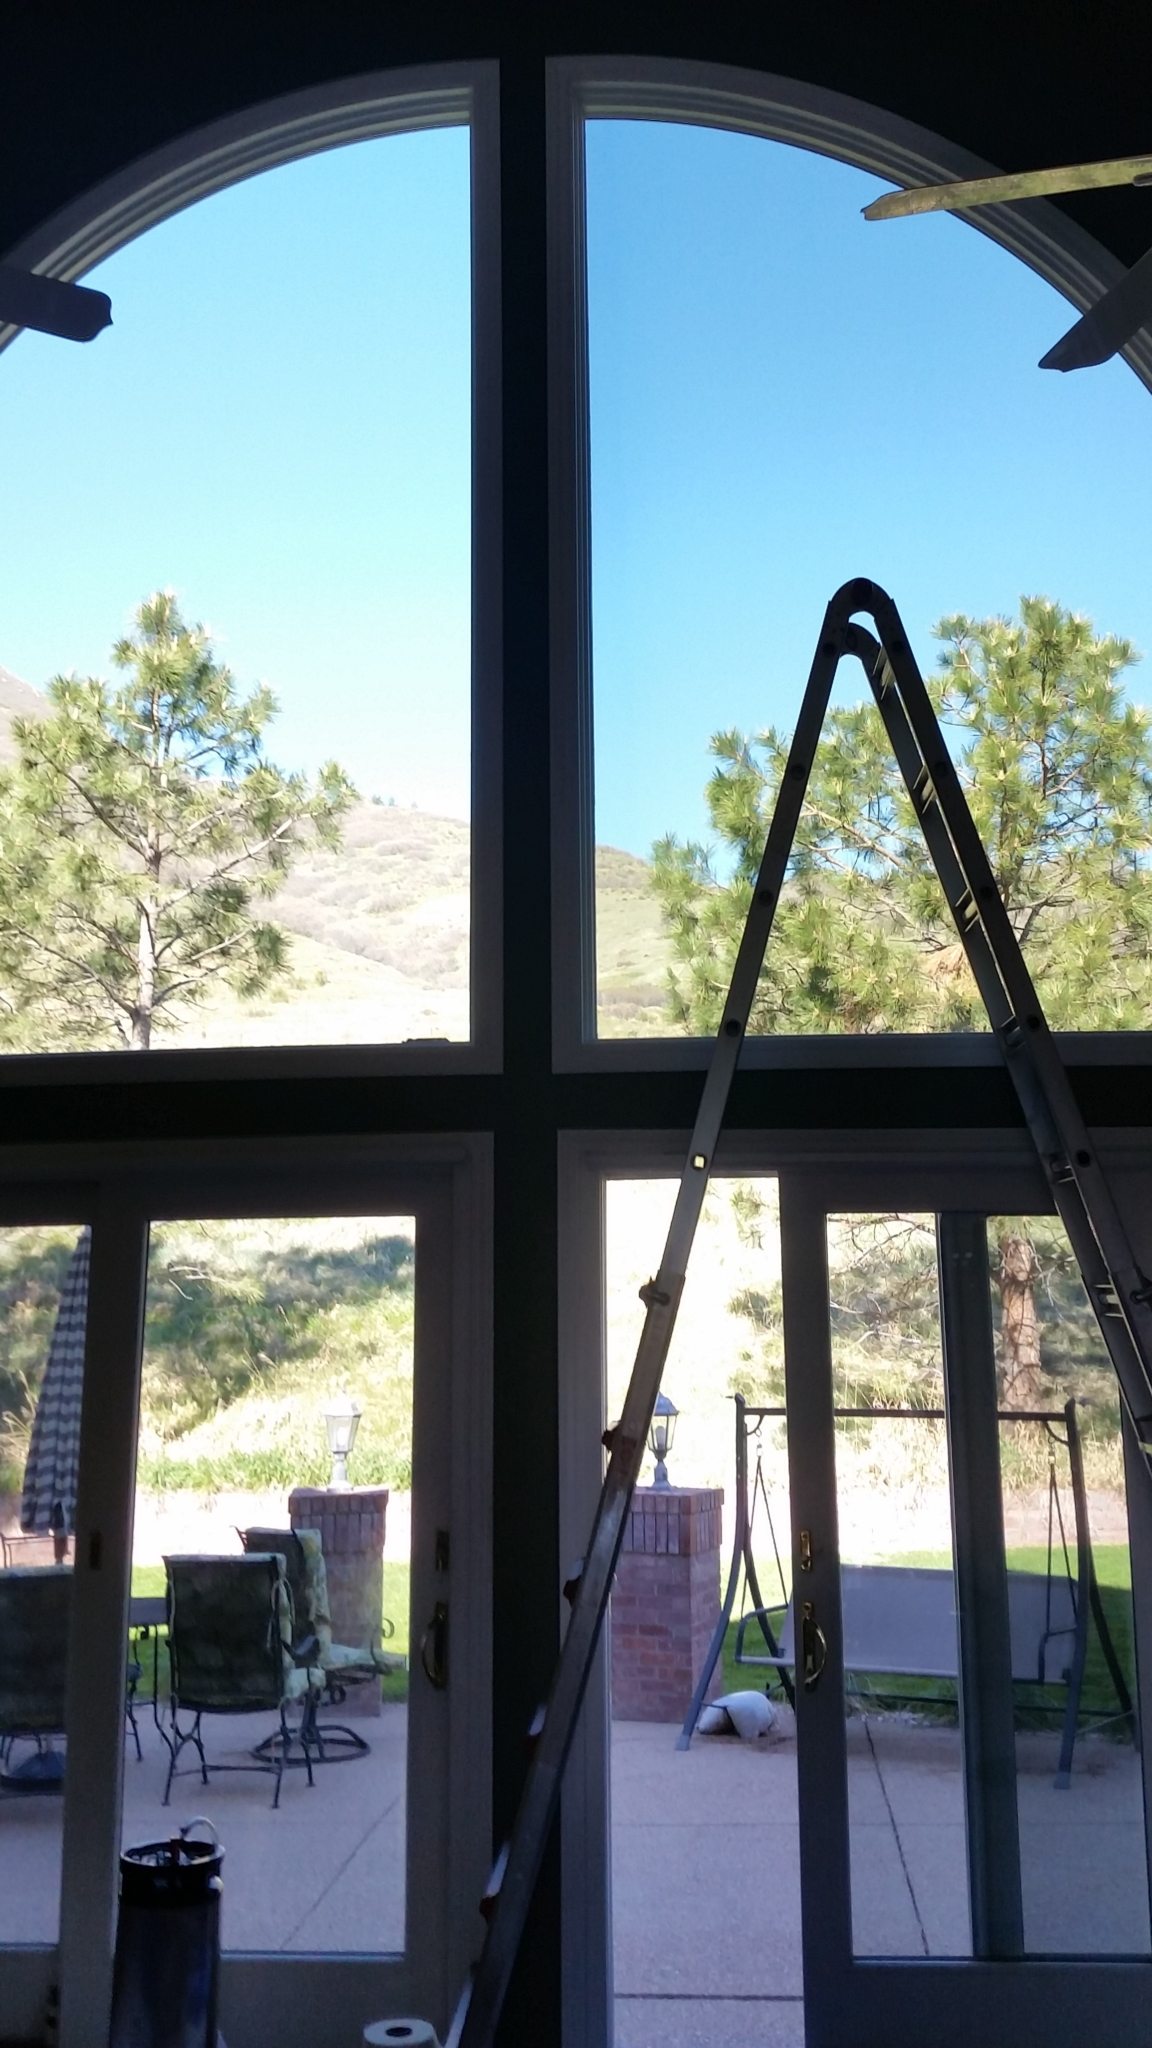 Installing home window tinting in Littleton, CO